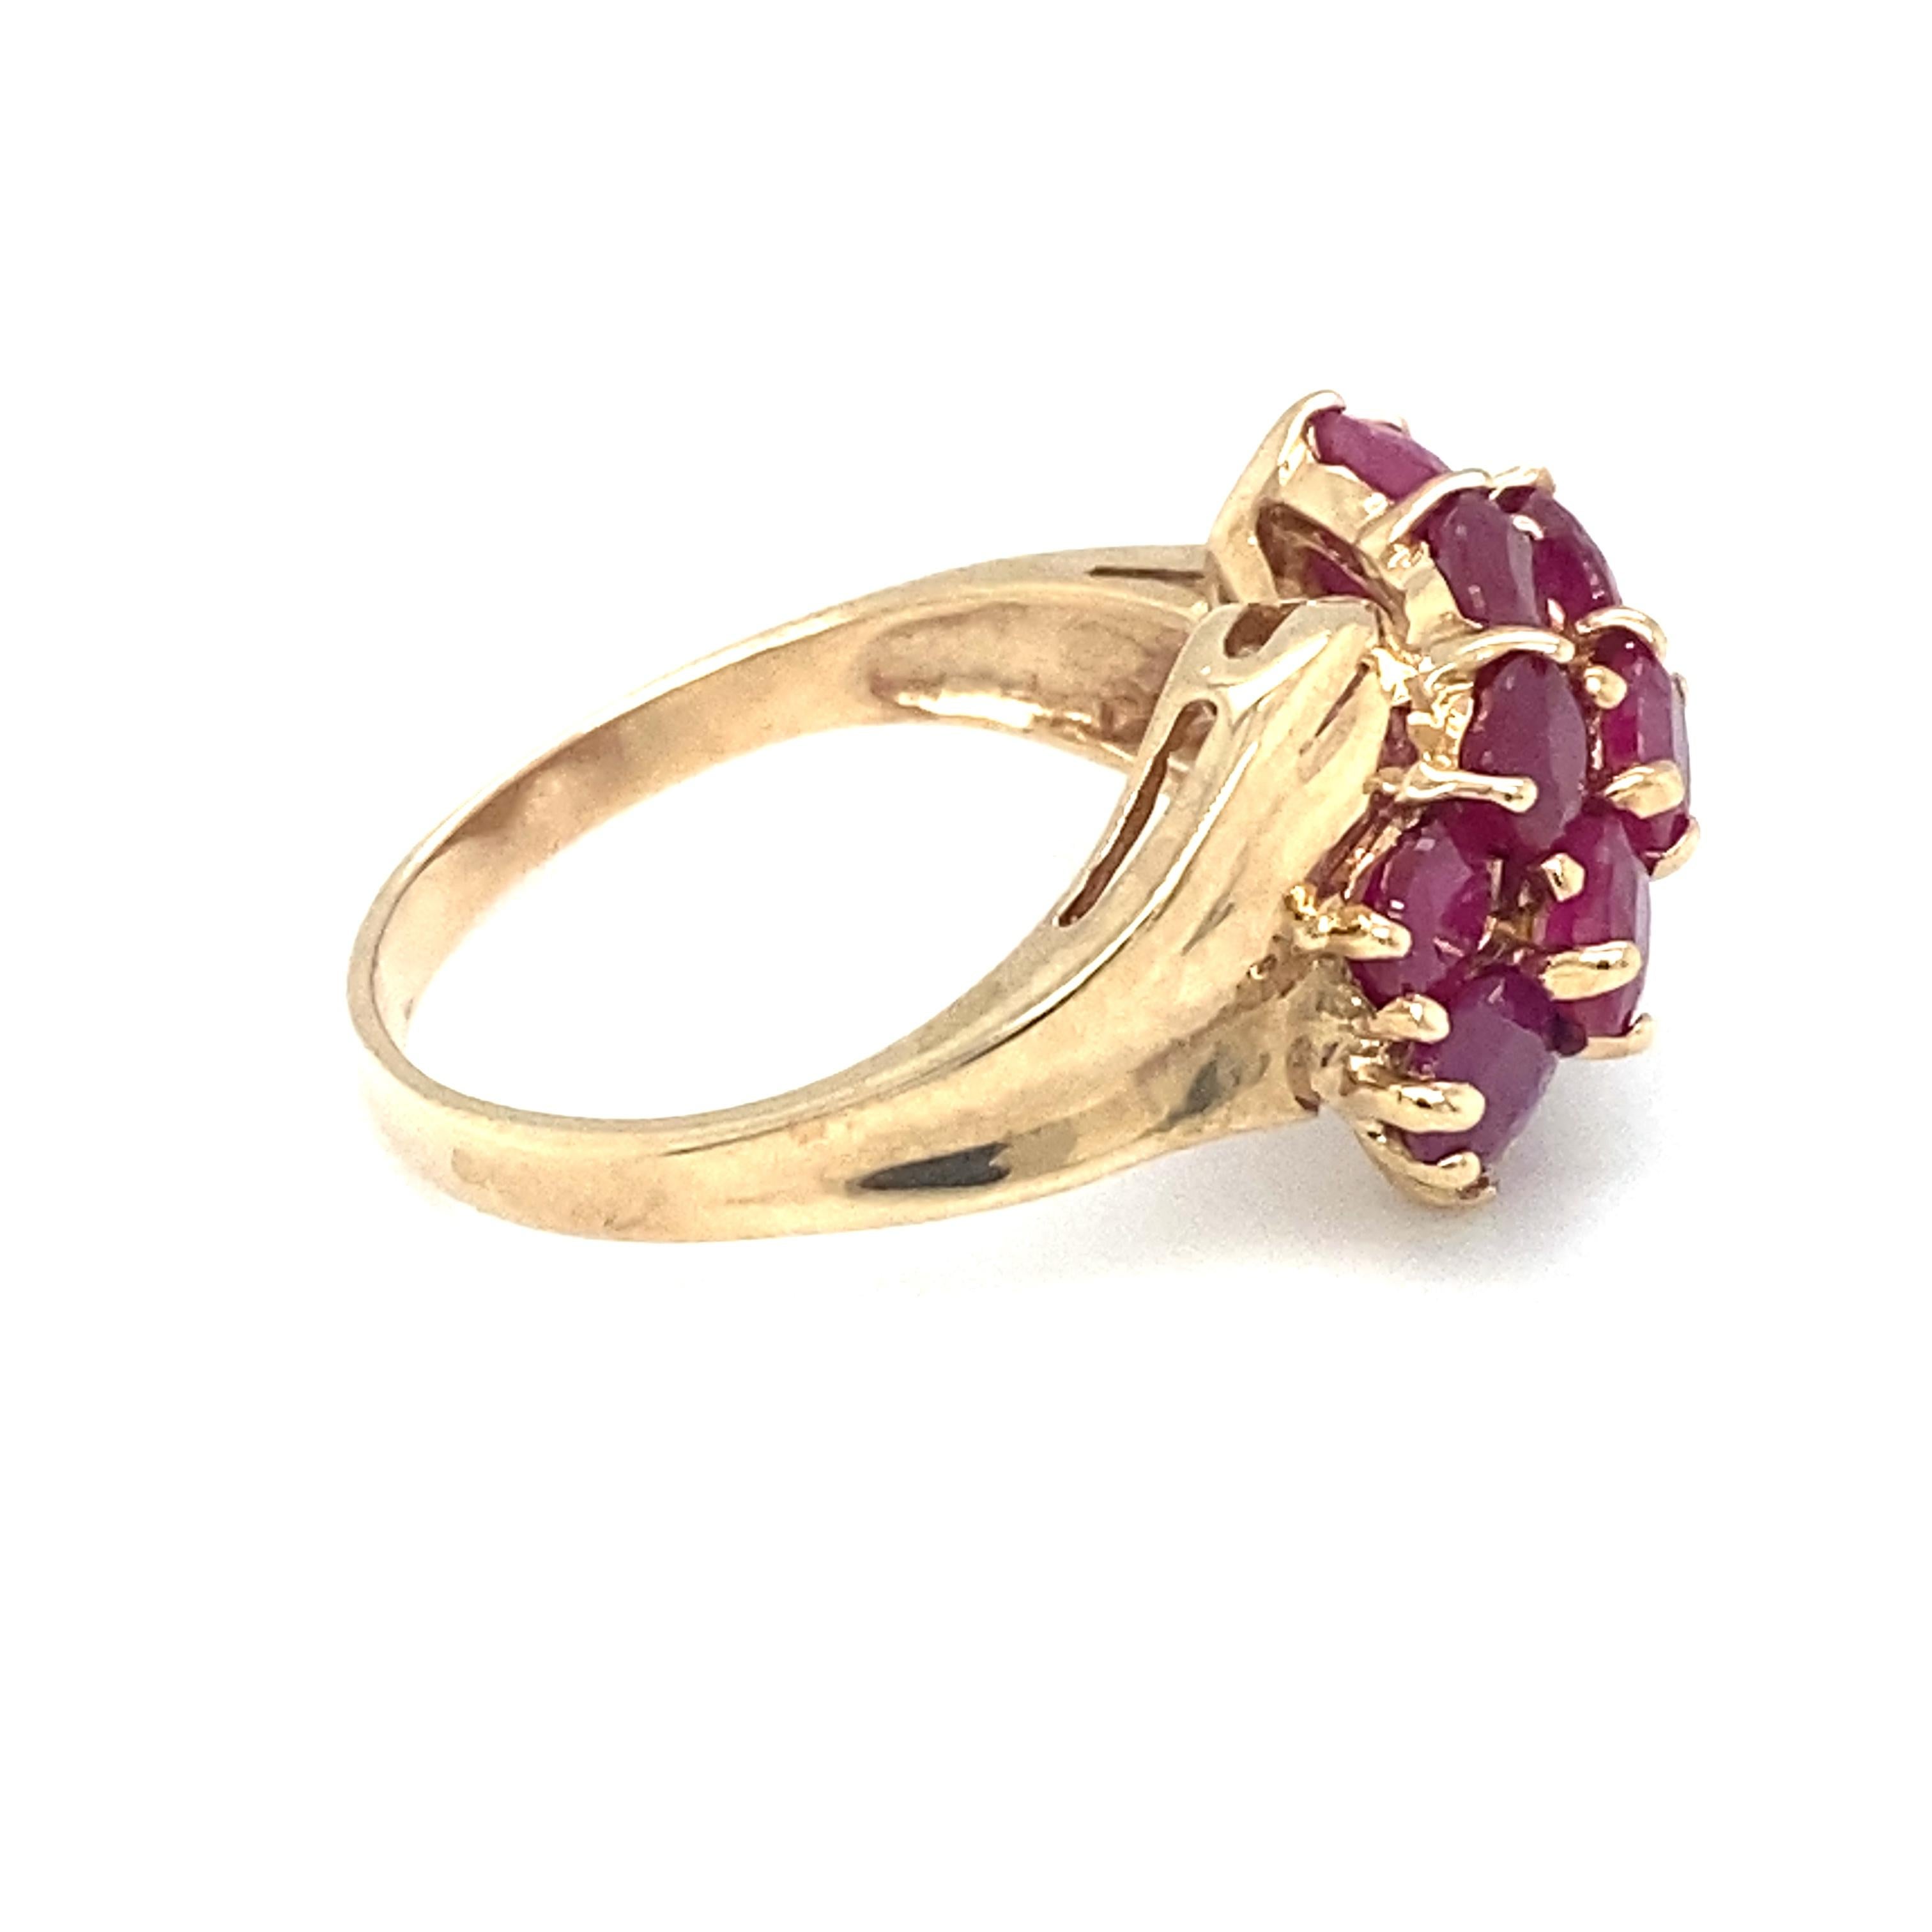 Women's or Men's Circa 1960s Three Row Ruby Cocktail Ring in 10 Karat Gold For Sale